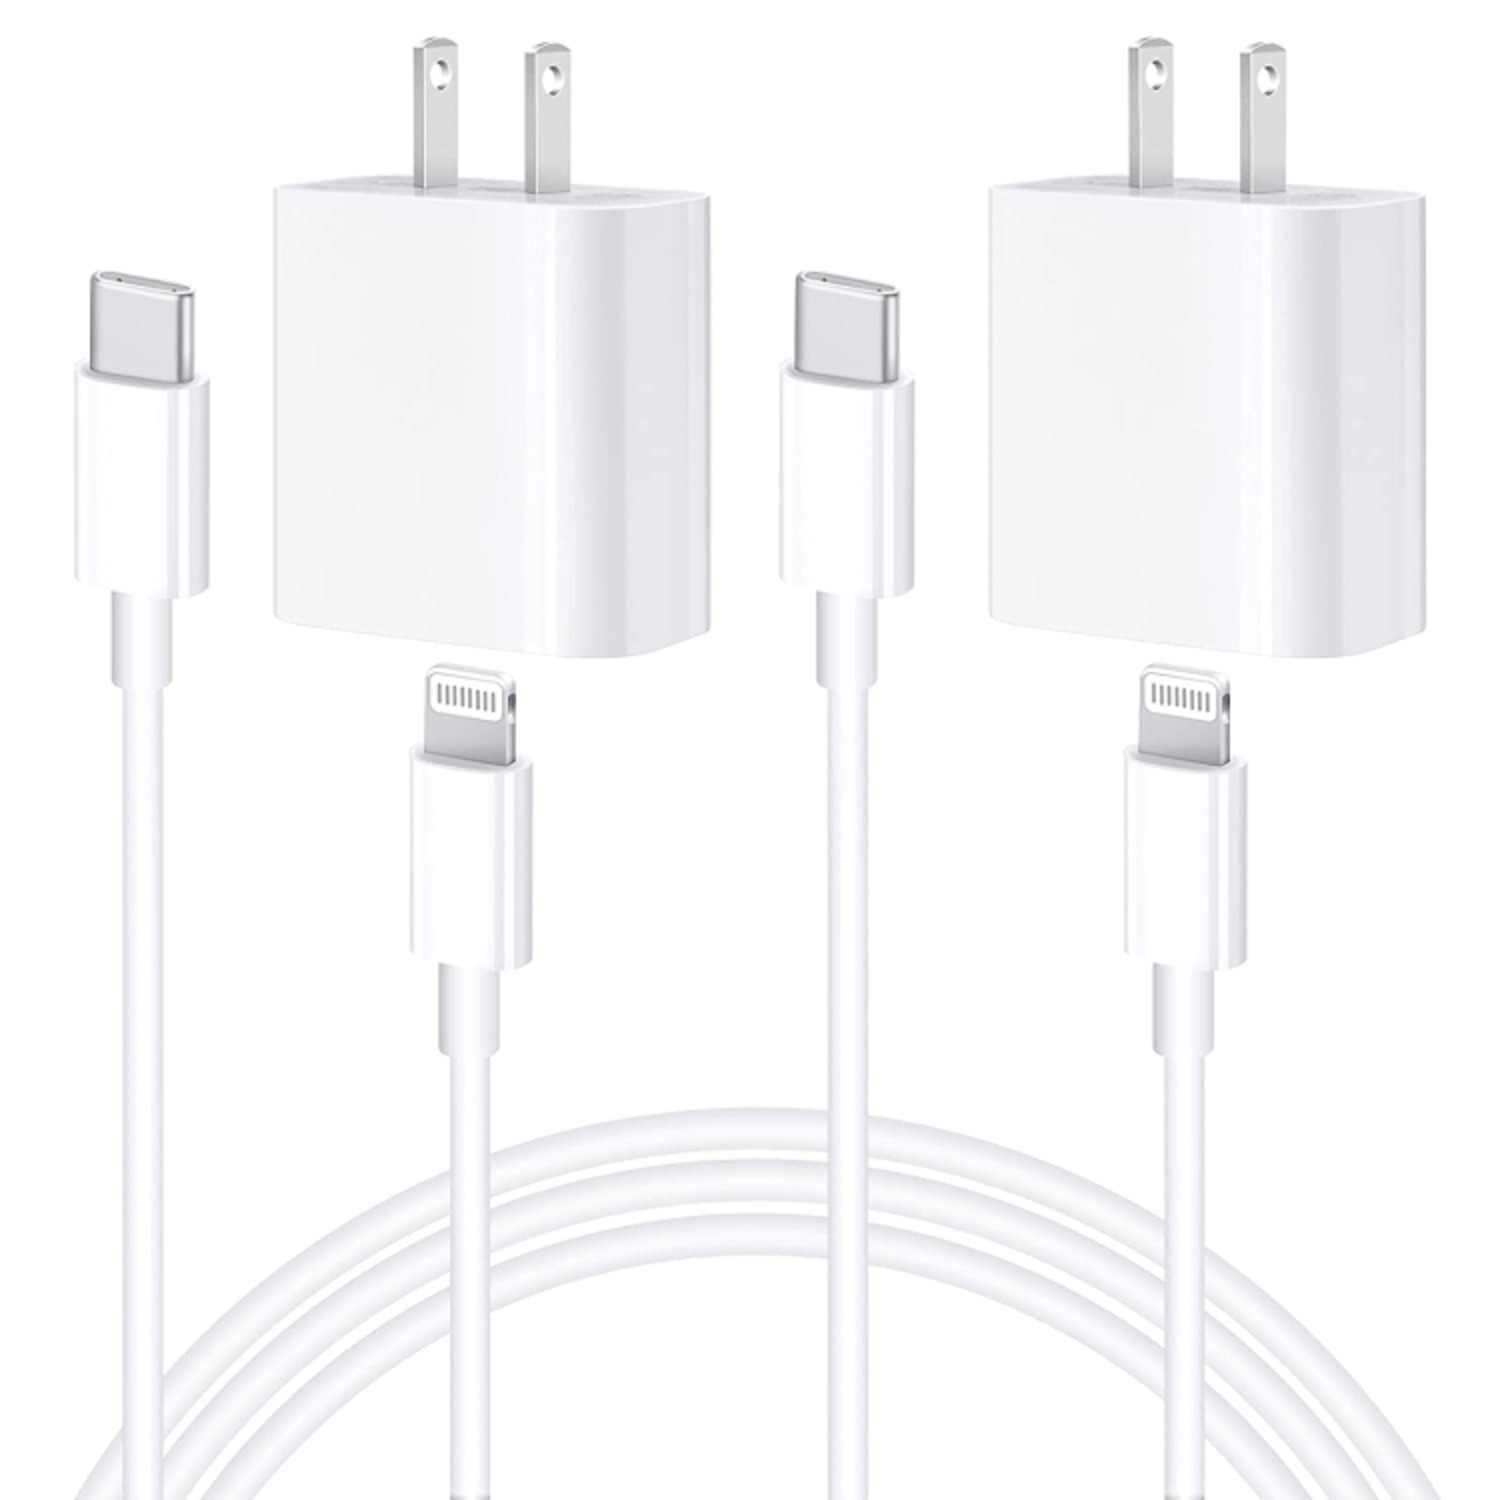 GENUINE APPLE (20W) USB-C POWER ADAPTER & USB-C TO LIGHTNING CABLE FOR APPLE IPHONE 12 -12 PRO - 12 PRO MAX - 11 - 11 PRO - 11 PRO MAX - X - 8 AND 11-INCH IPAD PRO AND IPAD PRO (ALL GENERATIONS)